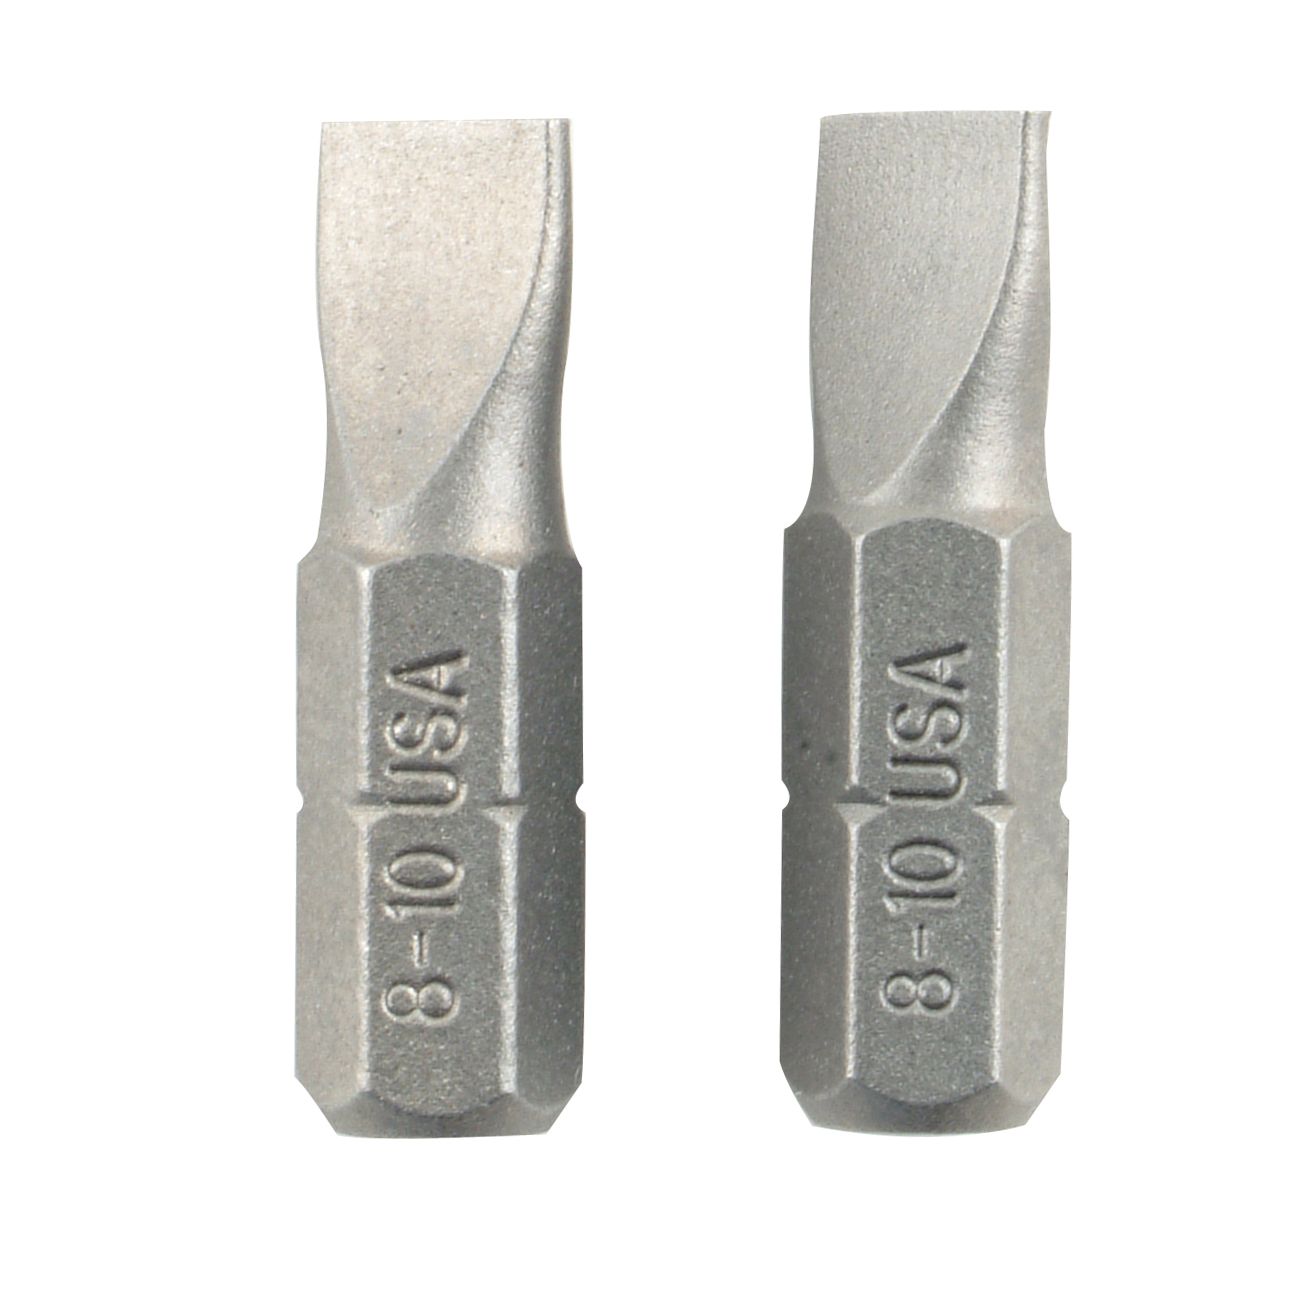 Craftsman 8-10 Slotted - 1 in. Insert Bit  (2) Pack